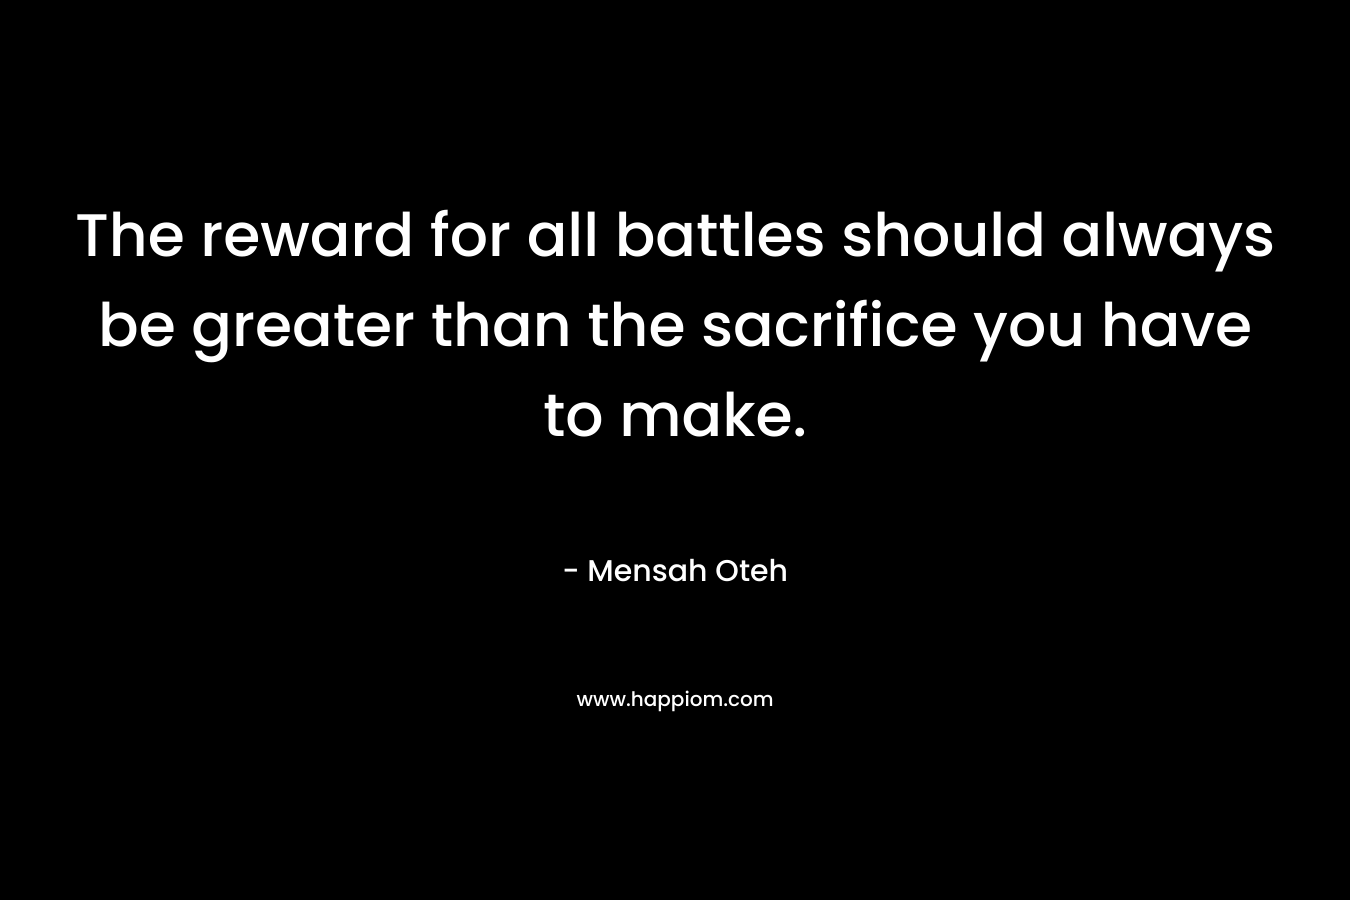 The reward for all battles should always be greater than the sacrifice you have to make.